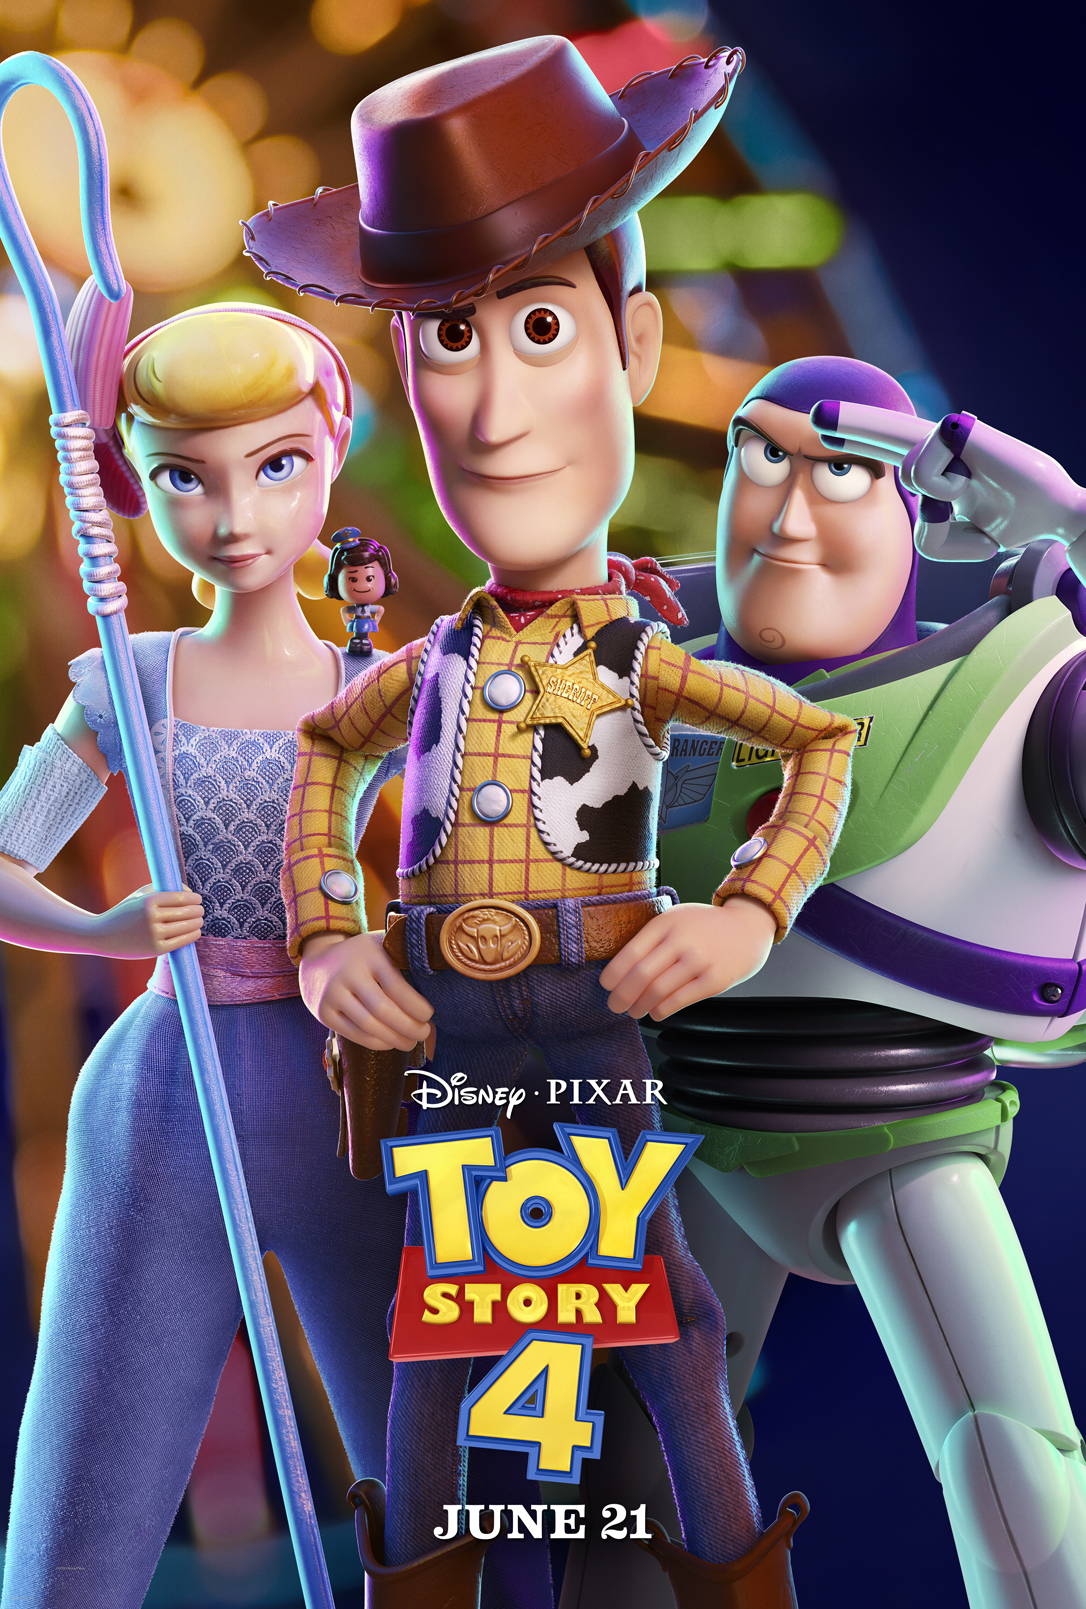 bonnie pixar - Google Search  Toy story, Toy story costumes, Toy story  movie